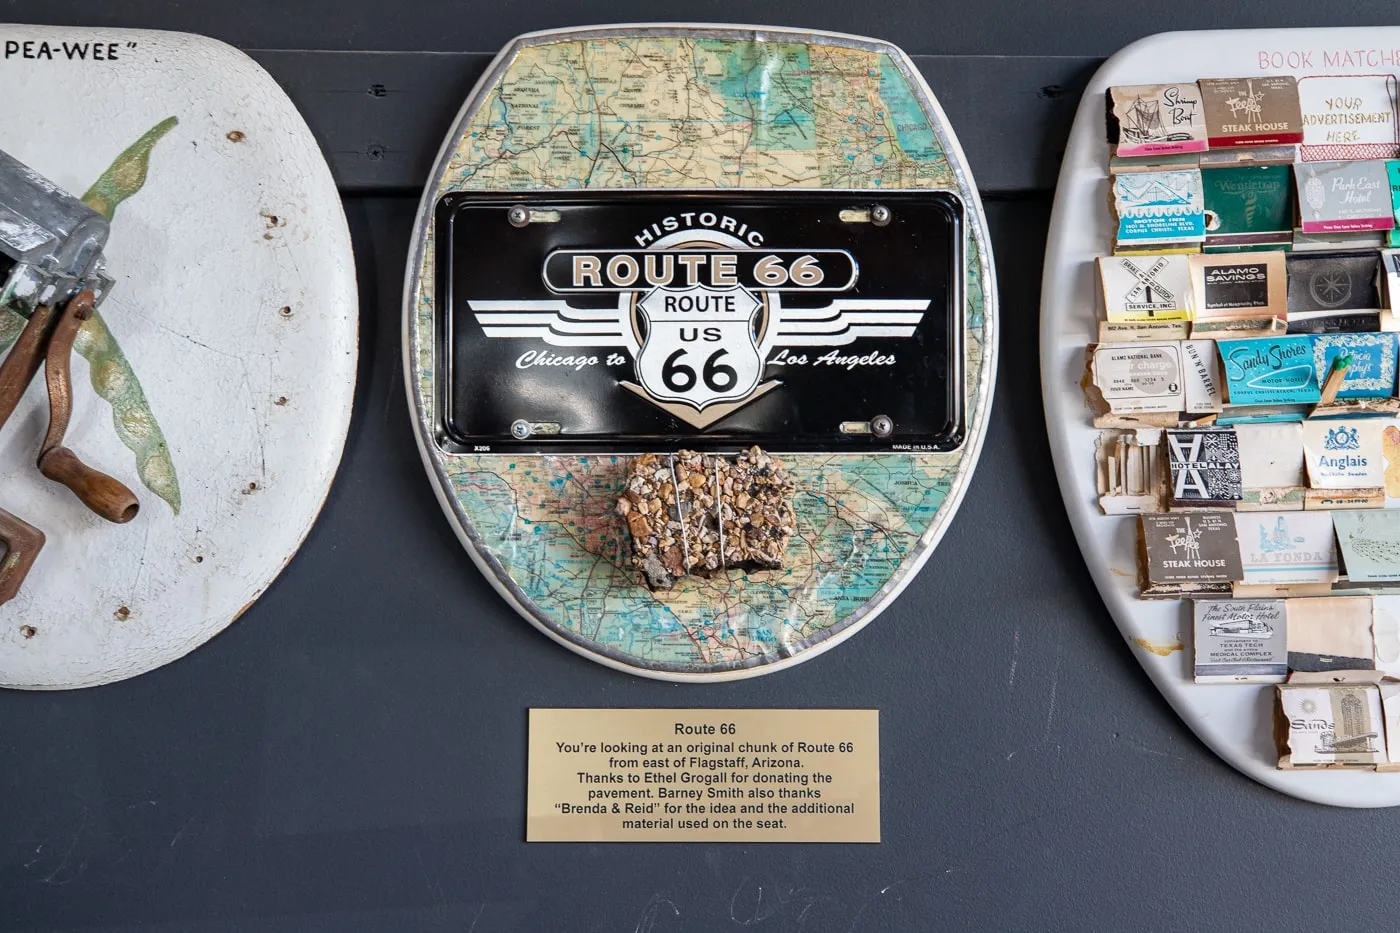 Route 66 toilet seat - Barney Smith's Toilet Seat Art Museum in The Colony, Texas at The Truck Yard Bar